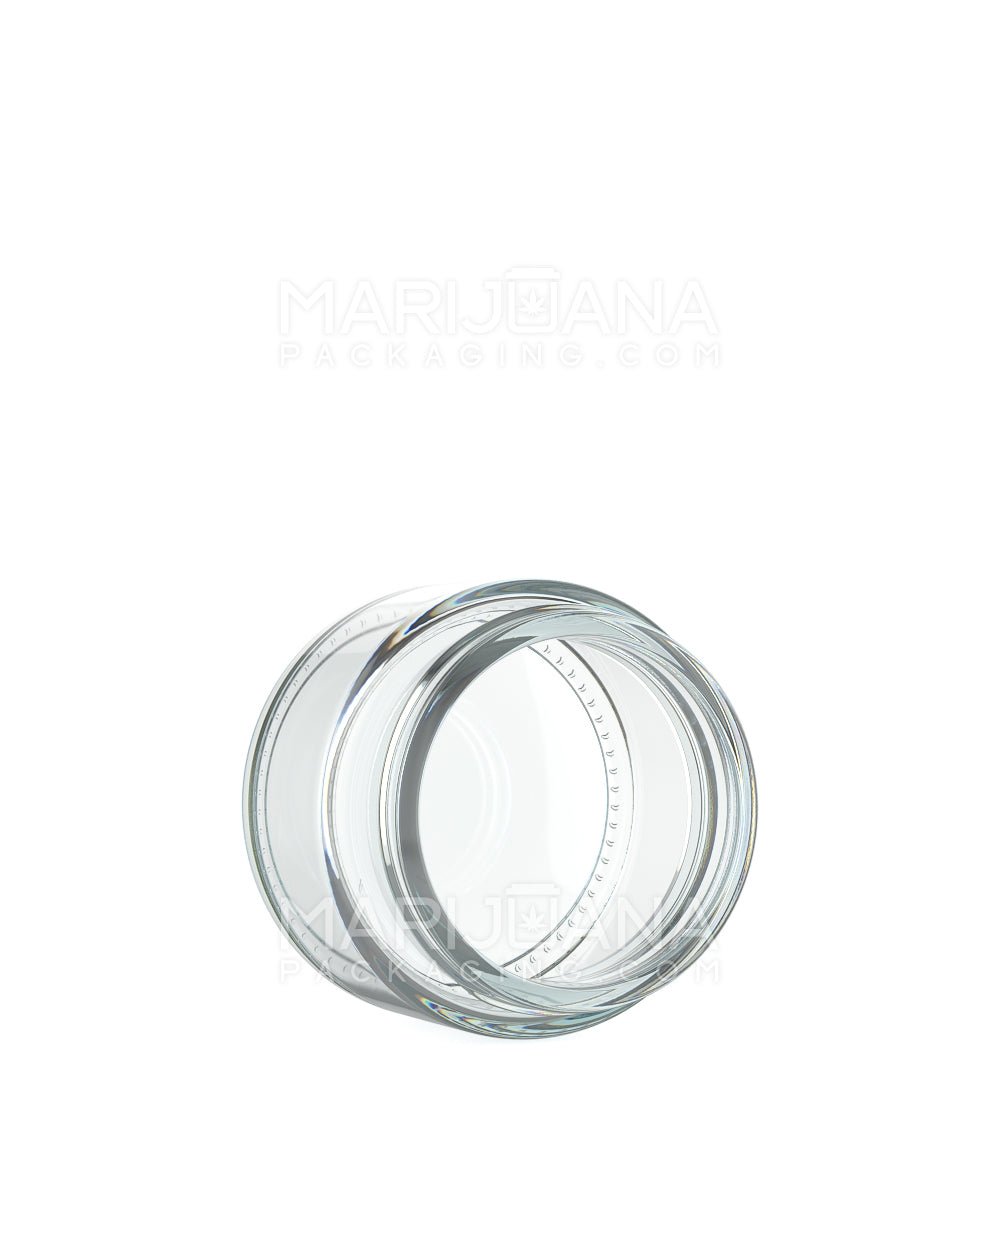 POLLEN GEAR | Kolossus Straight Sided Clear Glass Jars | 62mm - 3oz - 60 Count - 3